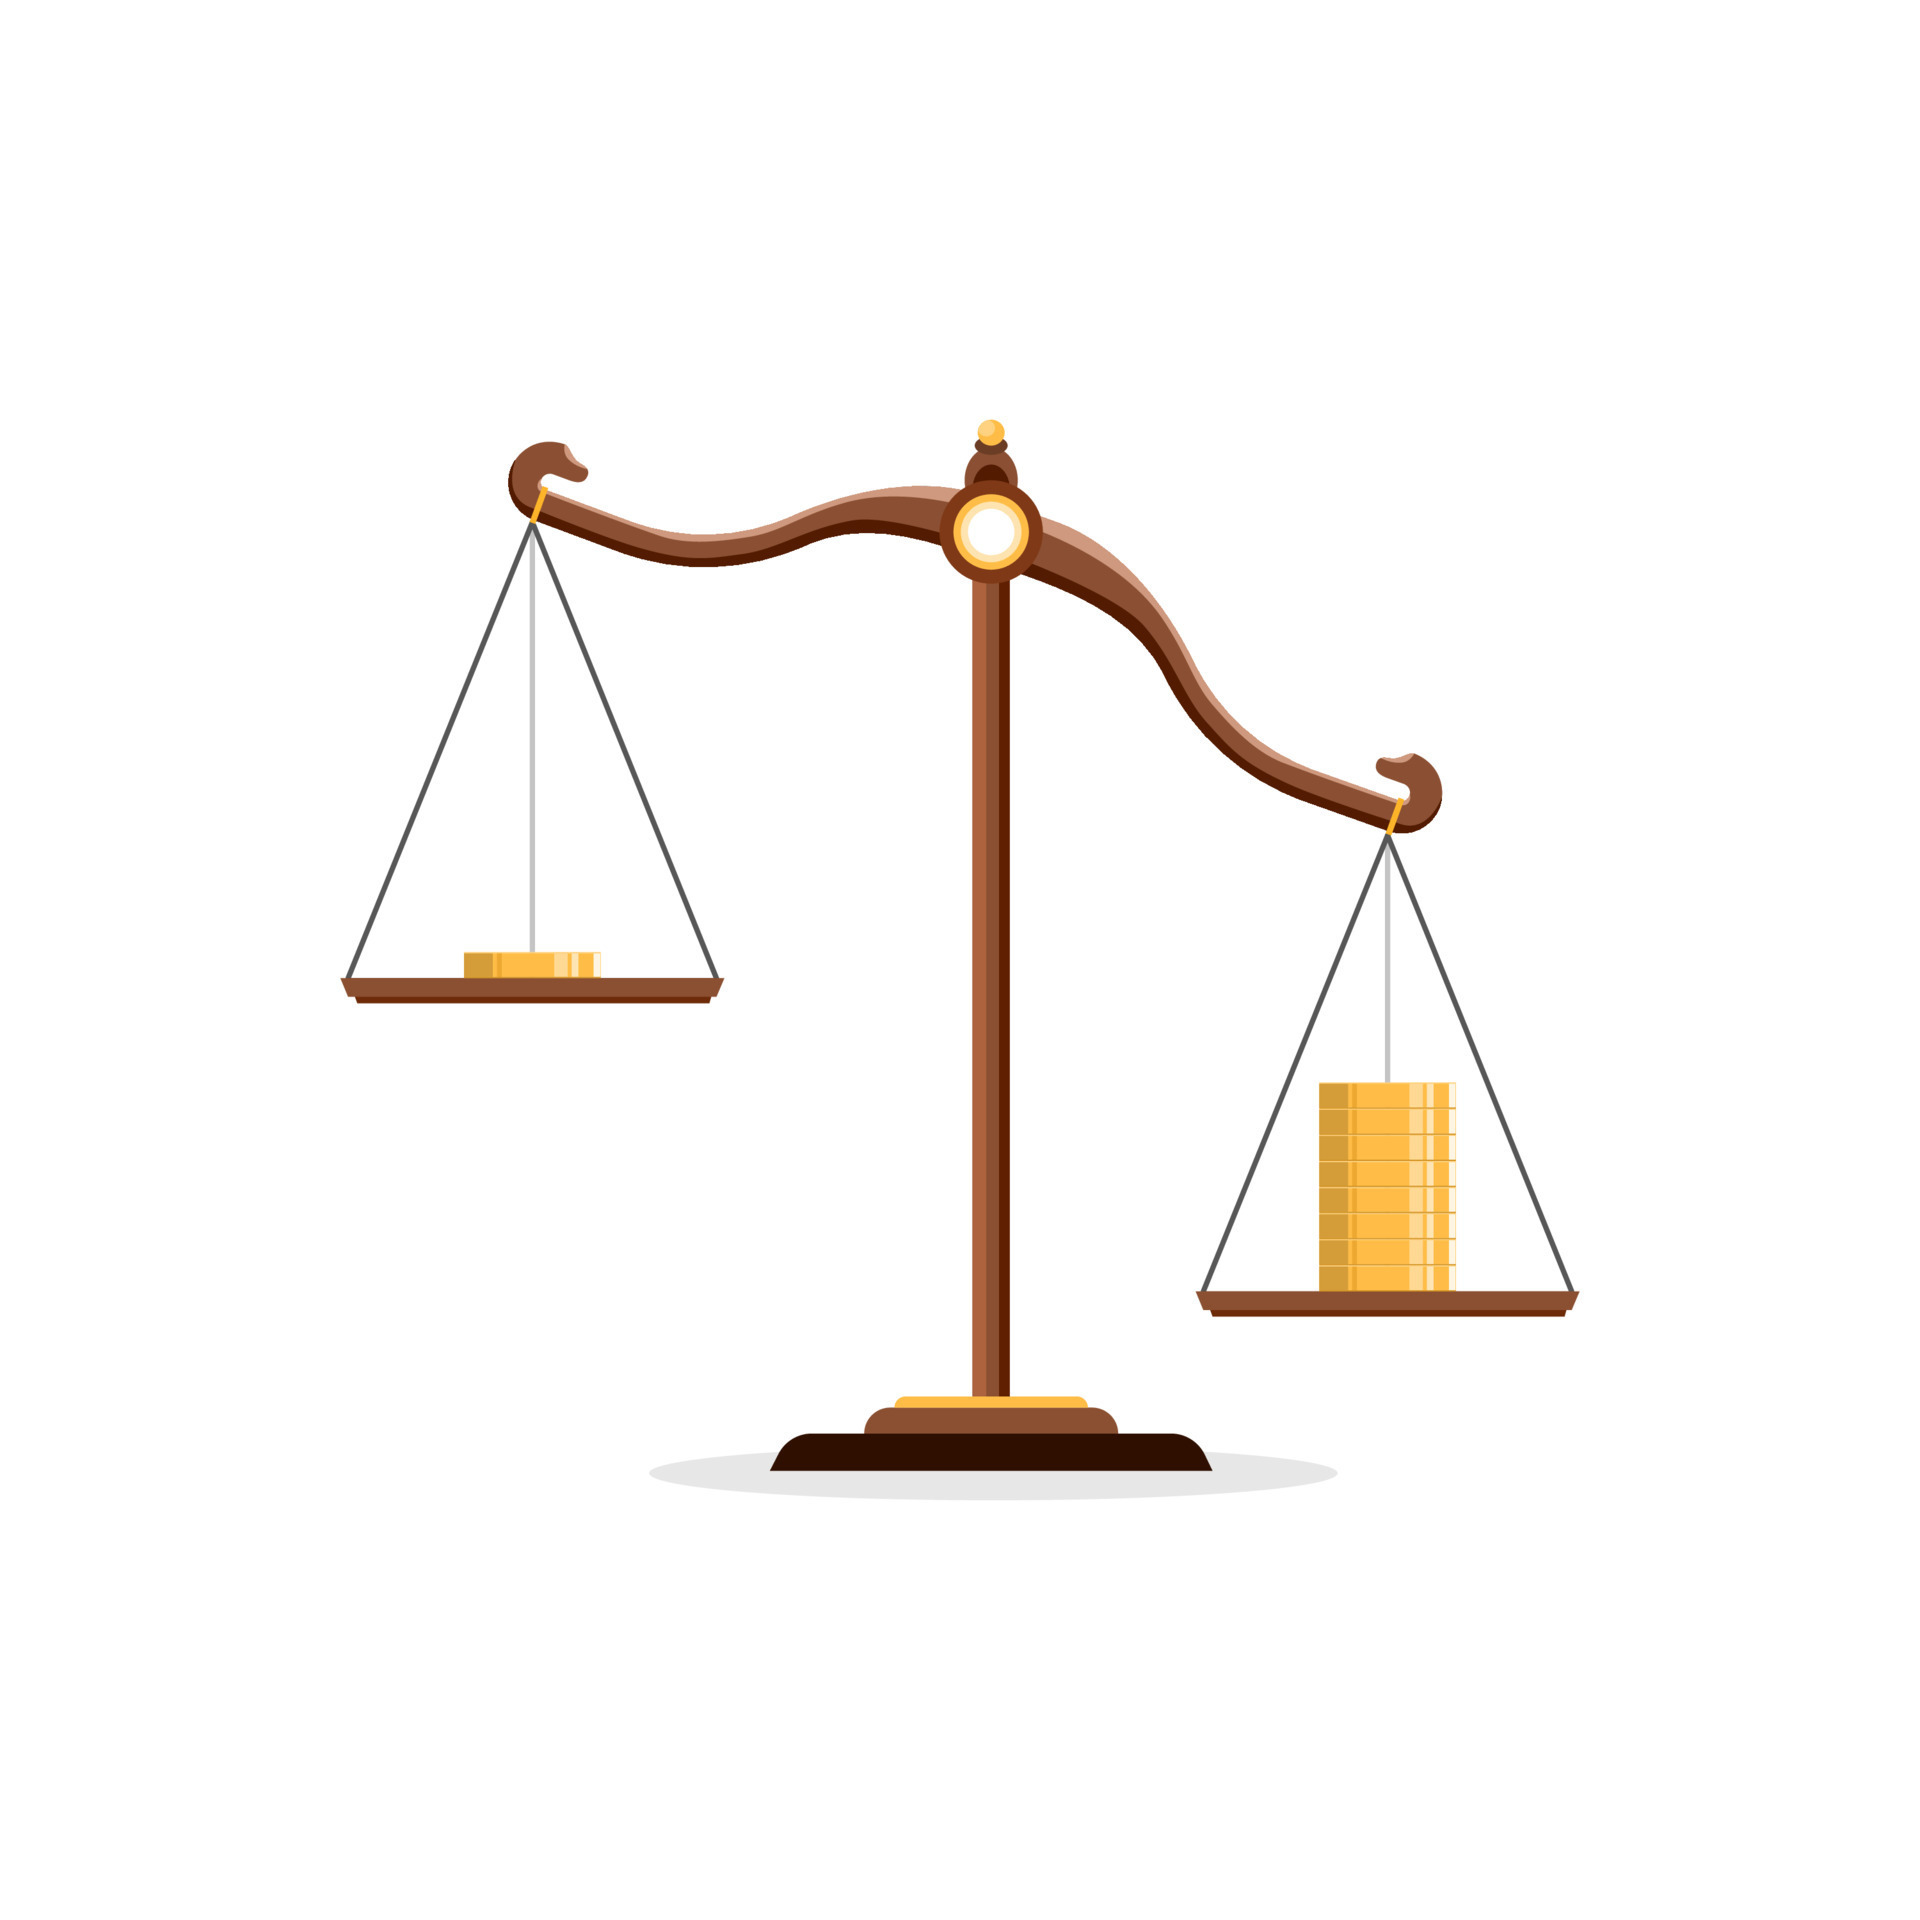 https://static.vecteezy.com/system/resources/previews/010/068/965/original/justice-scales-not-weight-balance-unfair-judgment-advantage-of-the-rich-inequality-vector.jpg